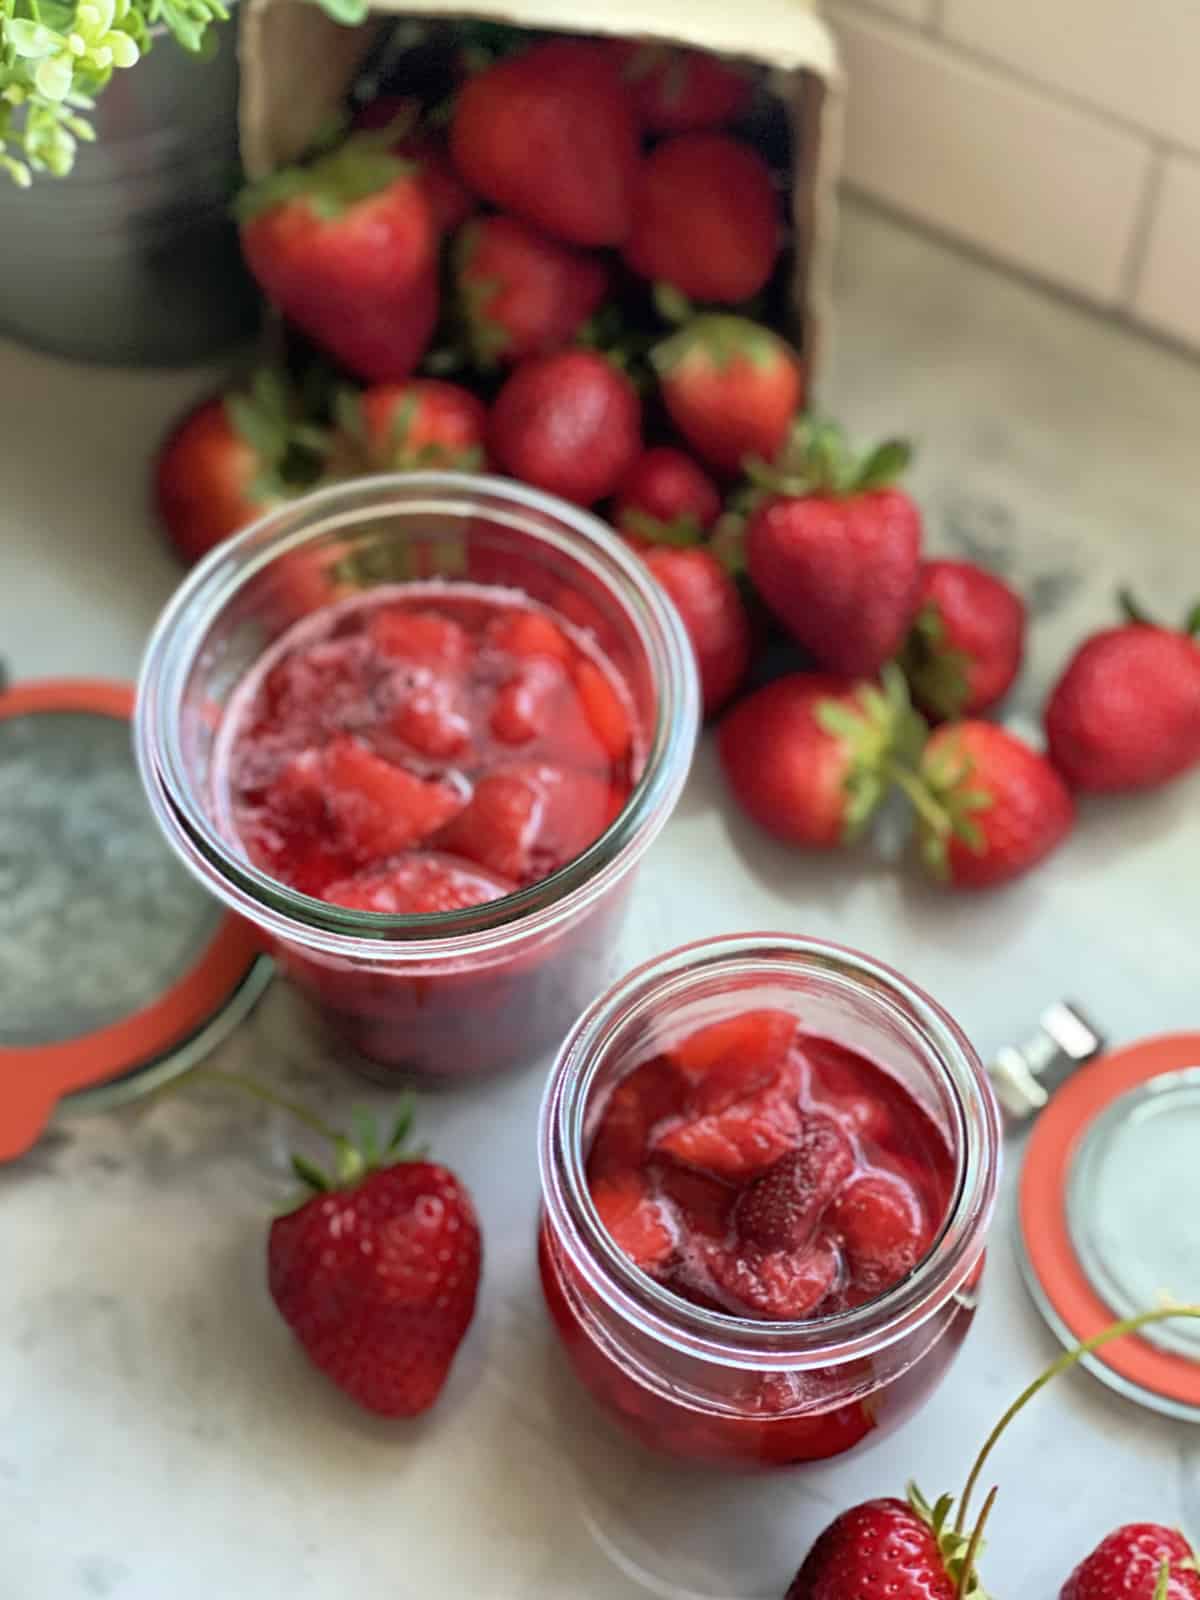 Top view of strawberry sauce in two glass jars.